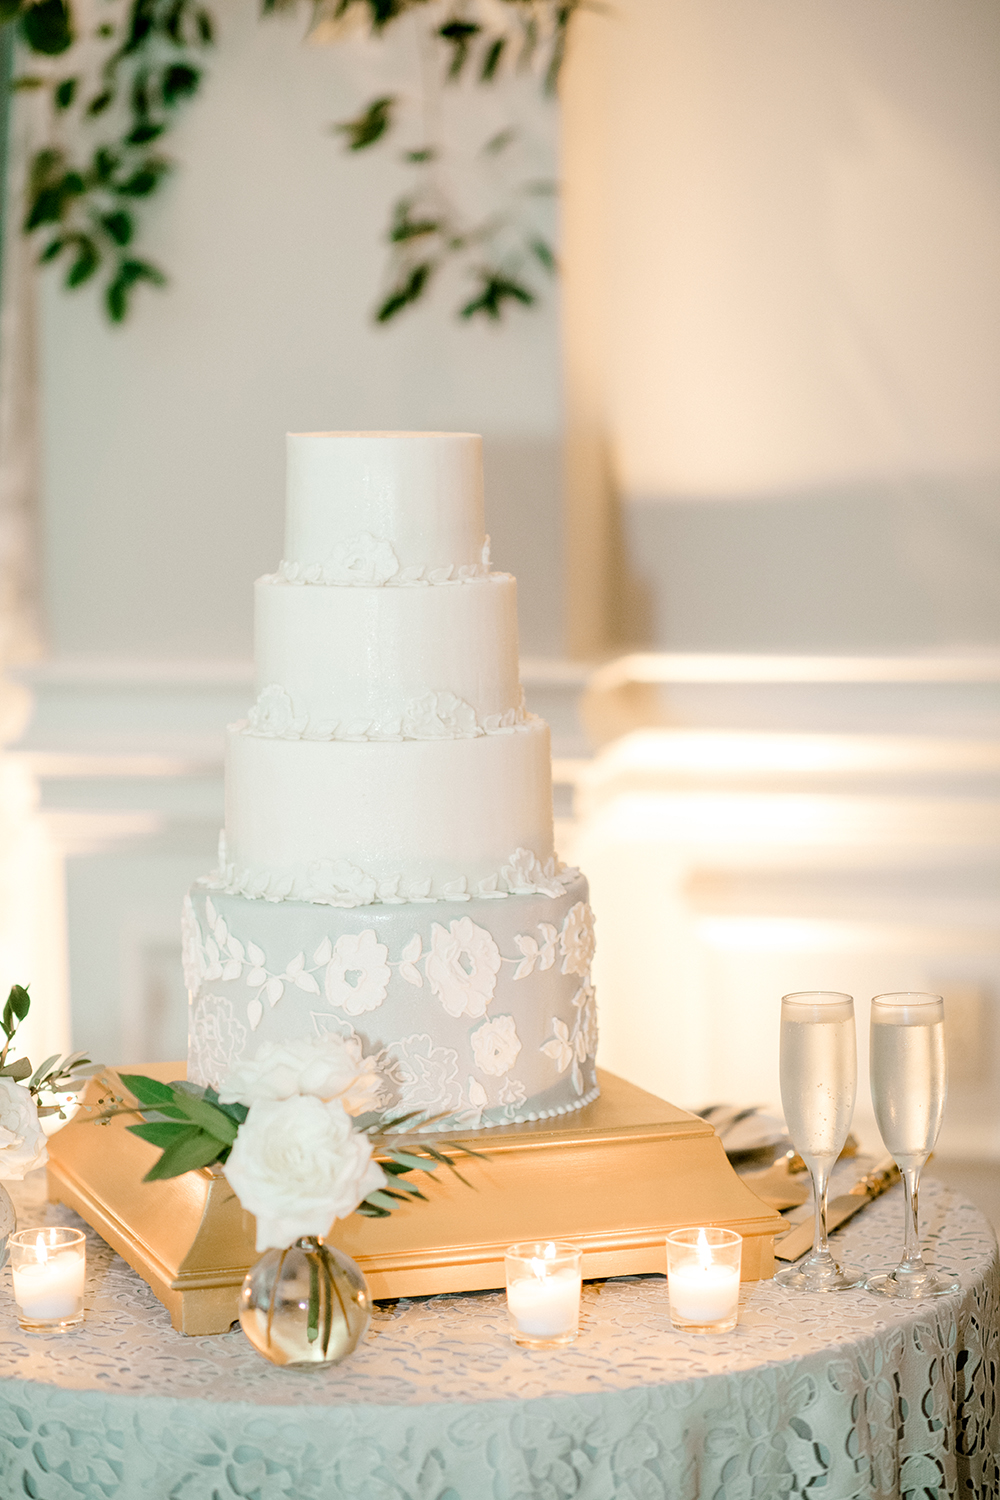 Wedding Cake with Flower Appliques